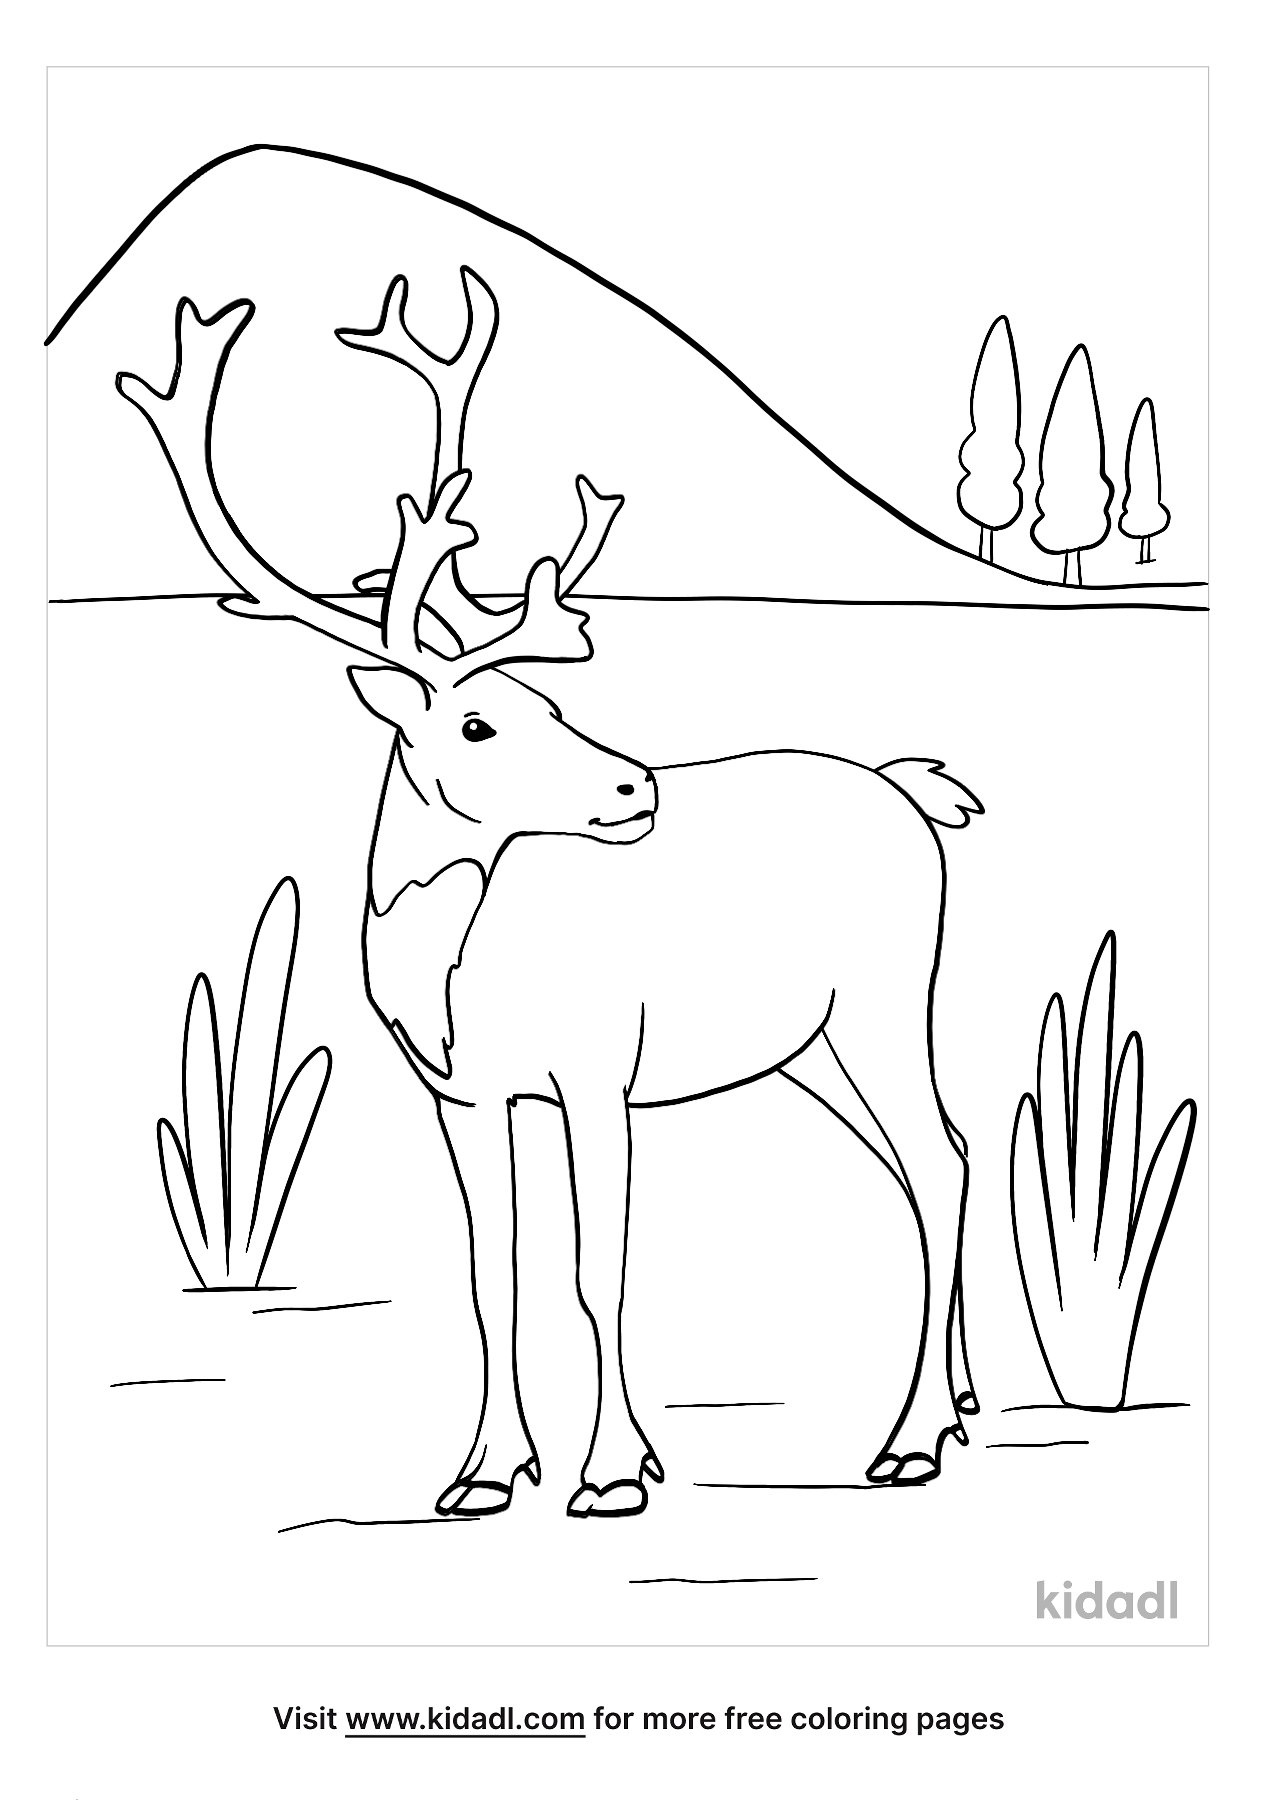 Caribou Coloring Pages   Free Animals Coloring Pages   Kidadl ...